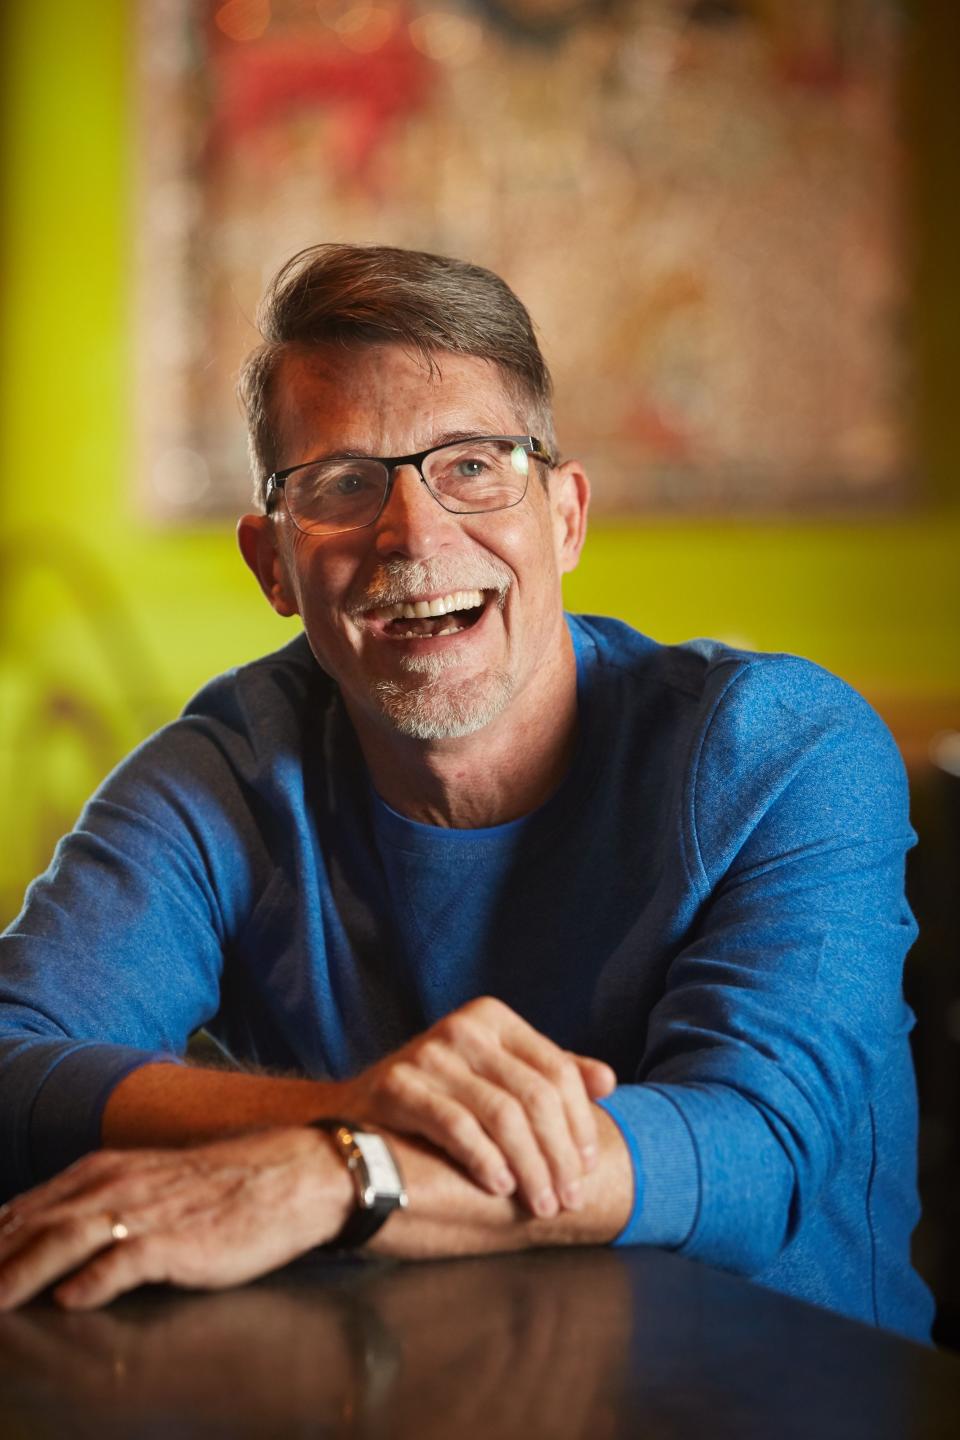 Chef Rick Bayless will visit the University of Notre Dame on Thursday, April 28. He is scheduled to speak about the current and future state of the restaurant industry.